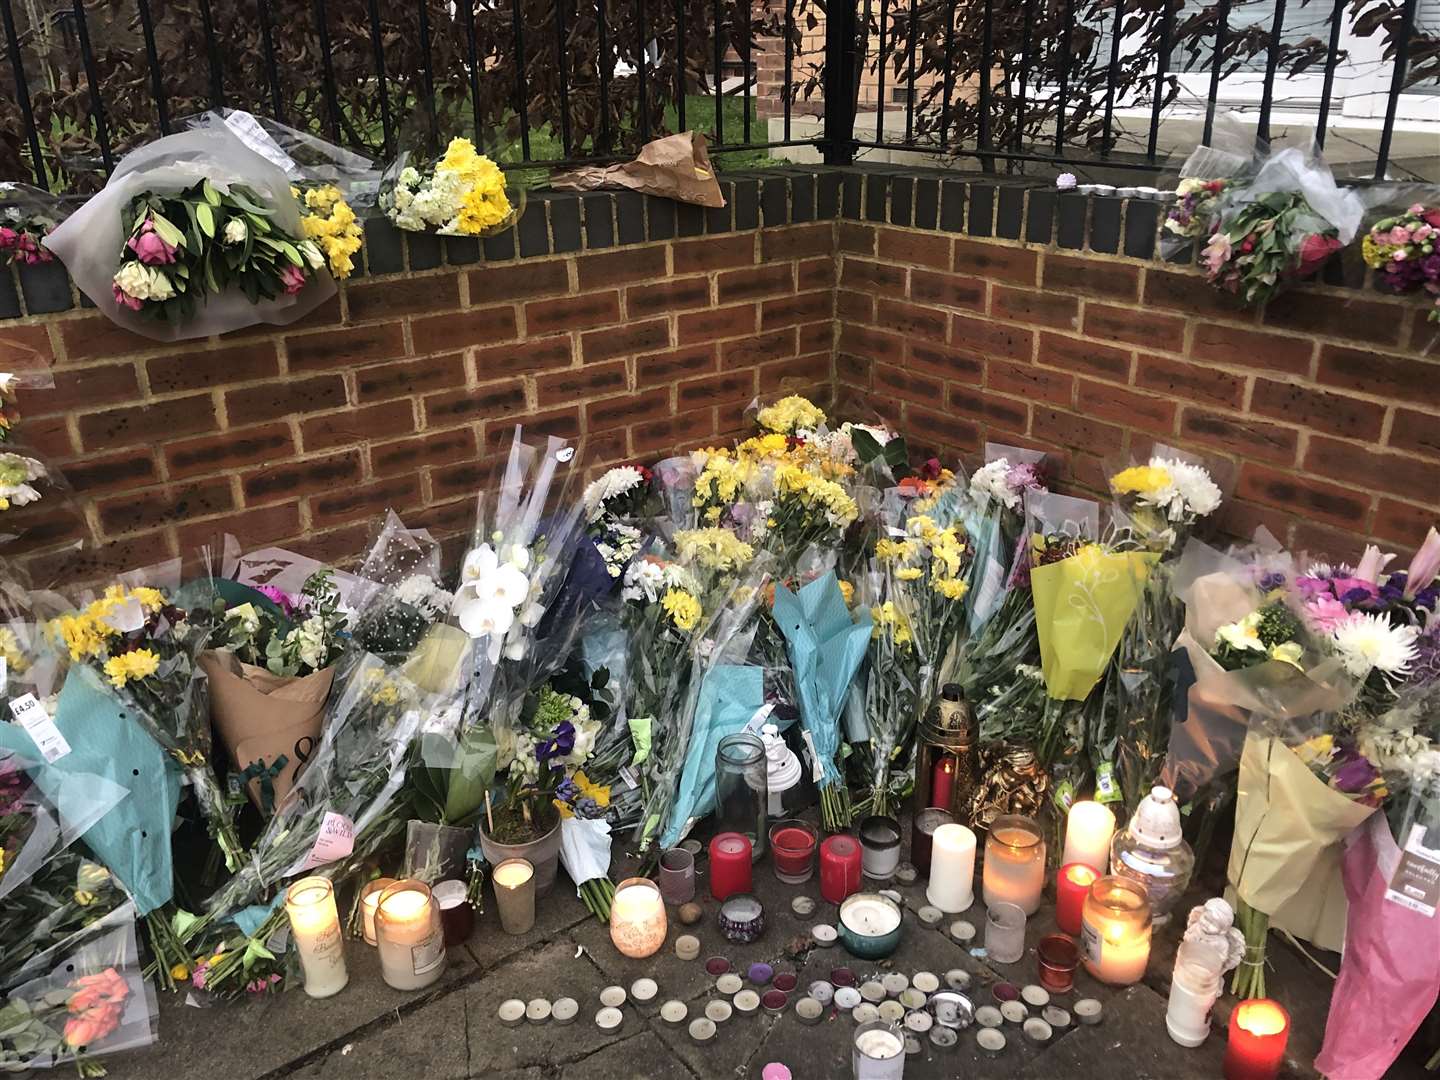 Floral, candle and basketball tributes have been laid for Szymon